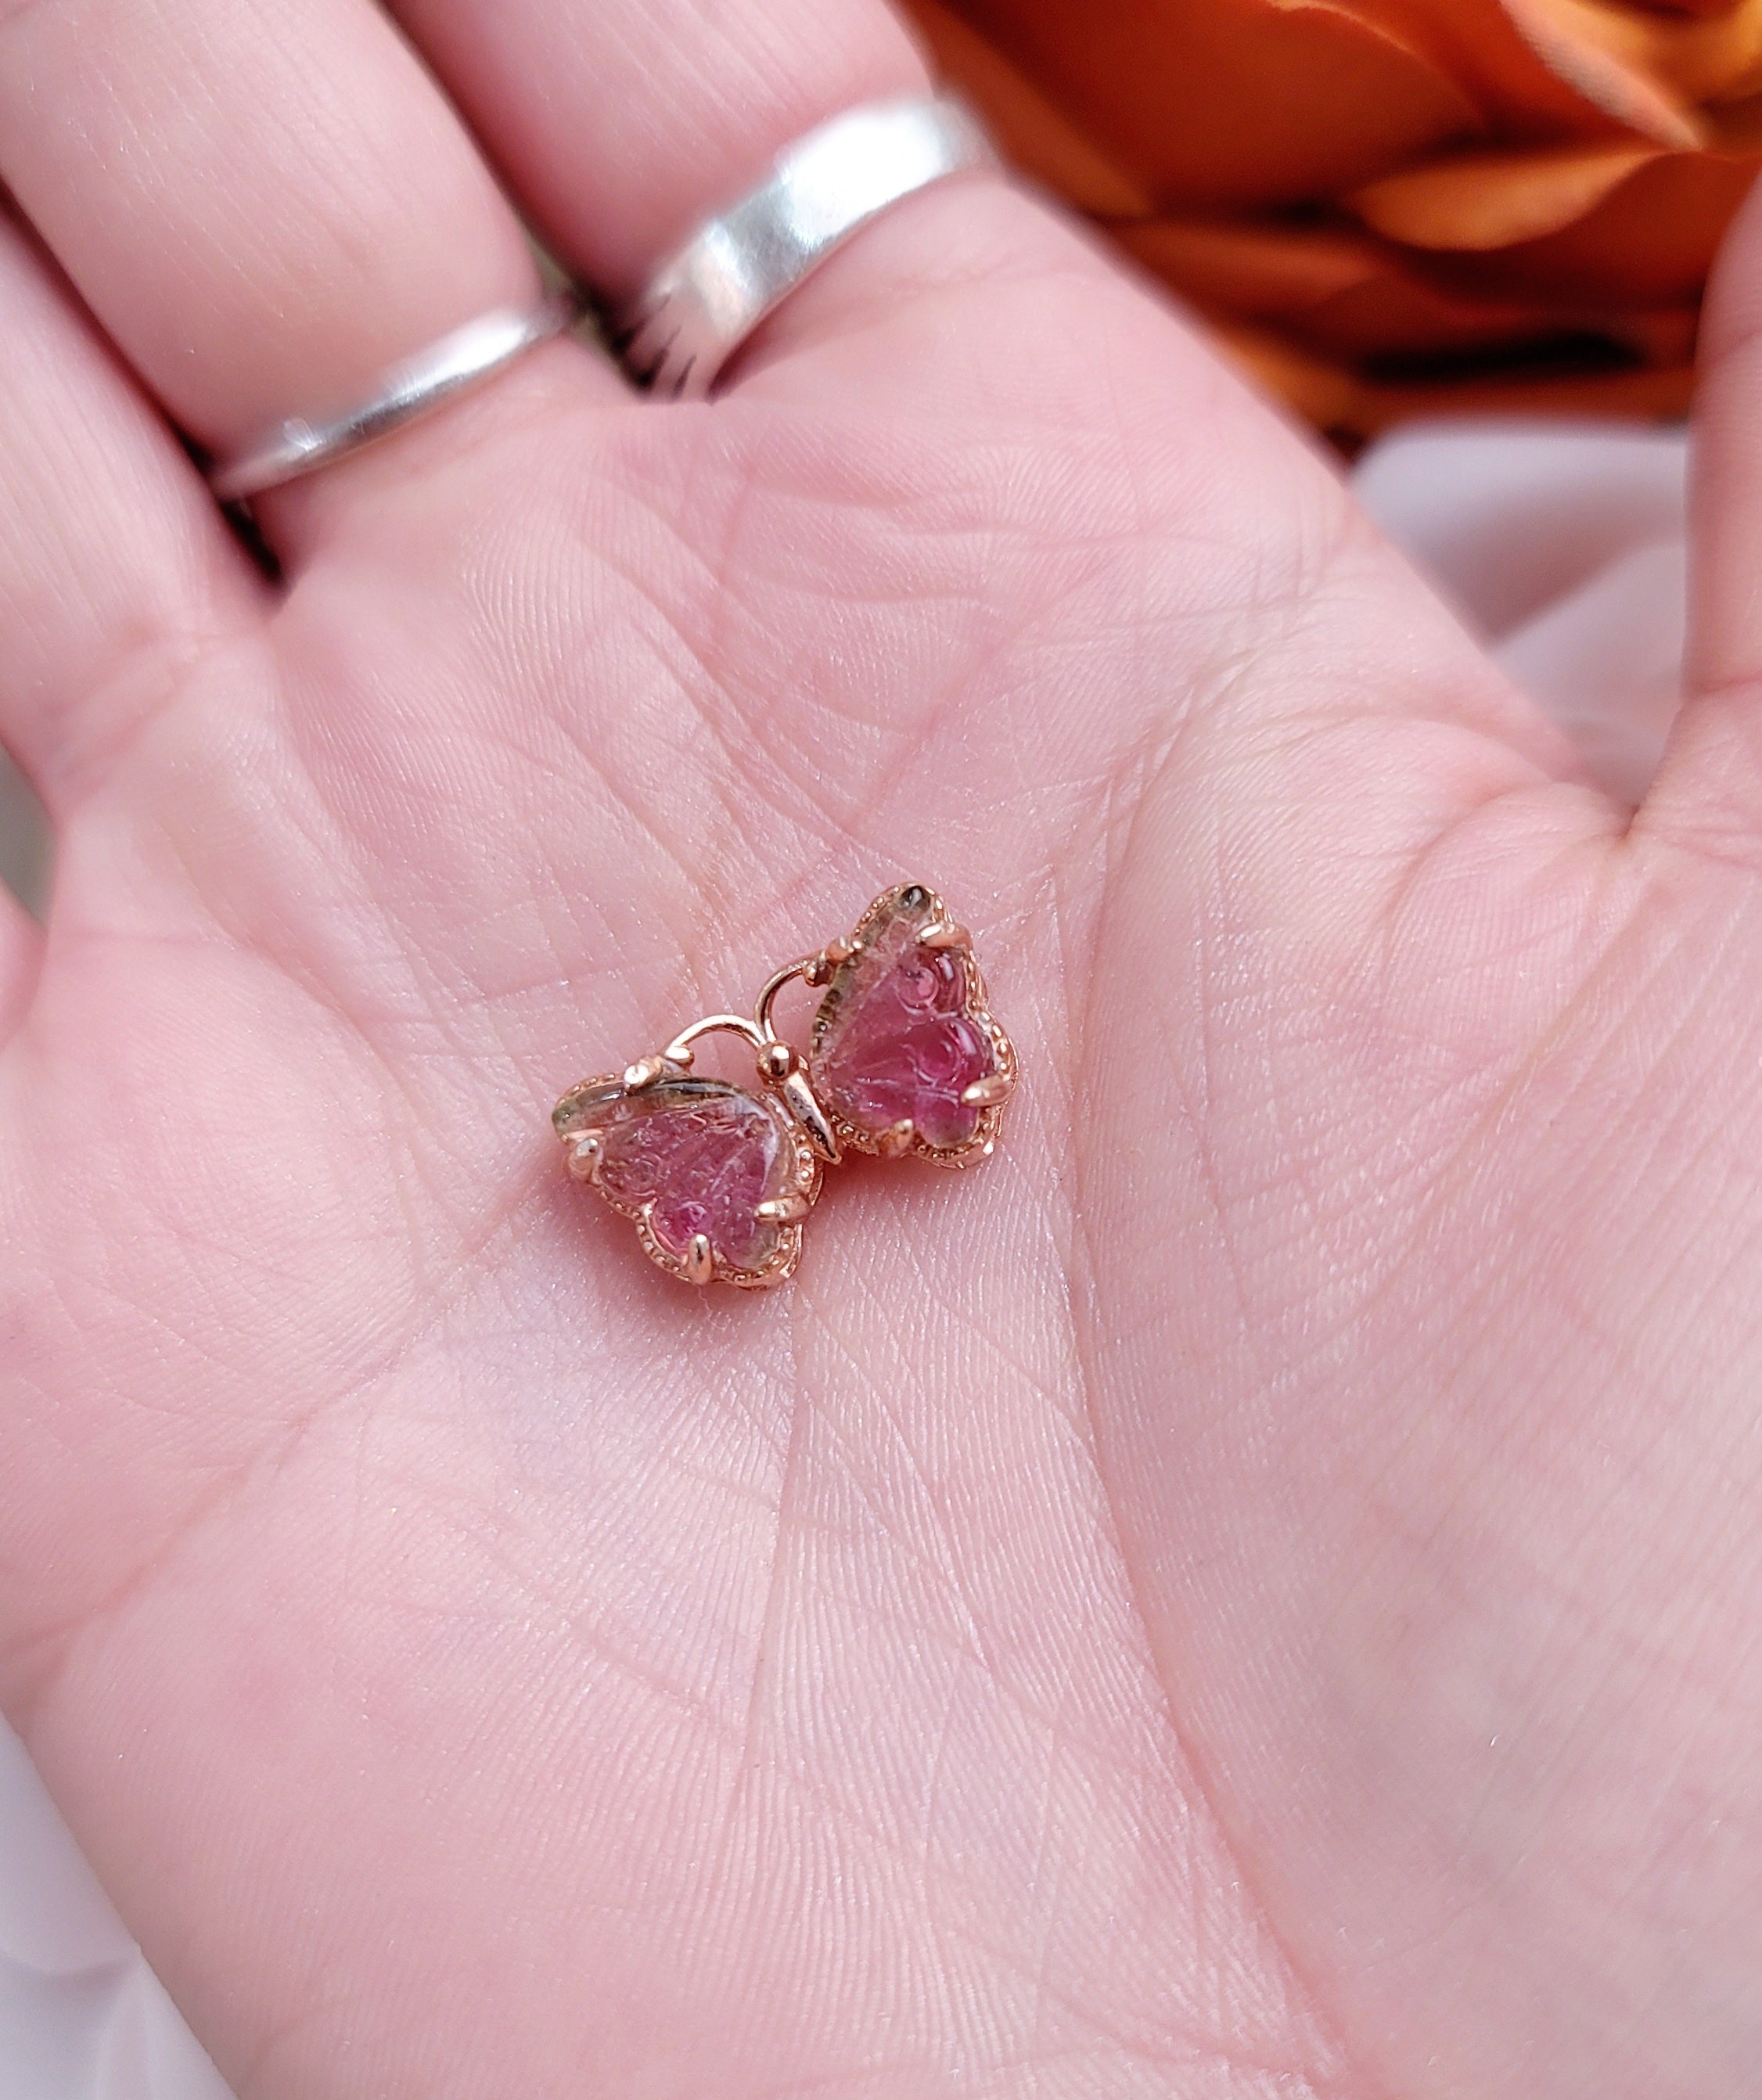 Watermelon Tourmaline Butterfly Pendant for Heart Healing, Joy and Love *Select Yours*